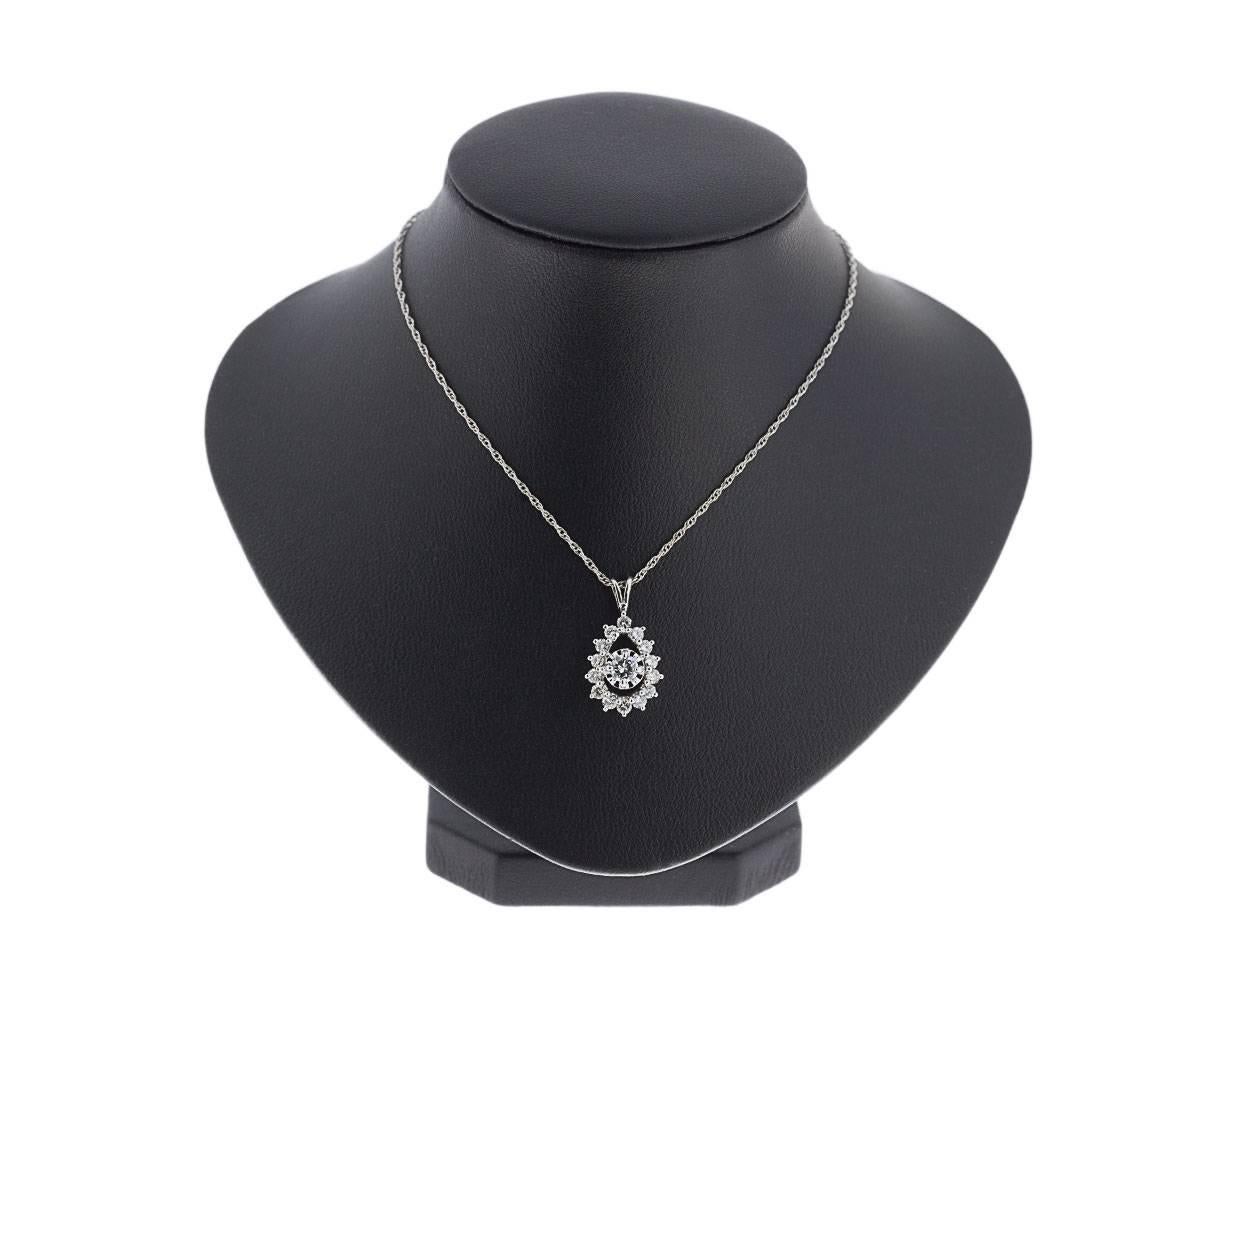 Simple yet elegant & beautiful would be the best way to describe this stunning 14K white gold pendant! It features a round diamond surrounded by a pear-shaped halo. The sparkly round brilliant diamonds weigh .75CTW. The pendant is attached to a 14